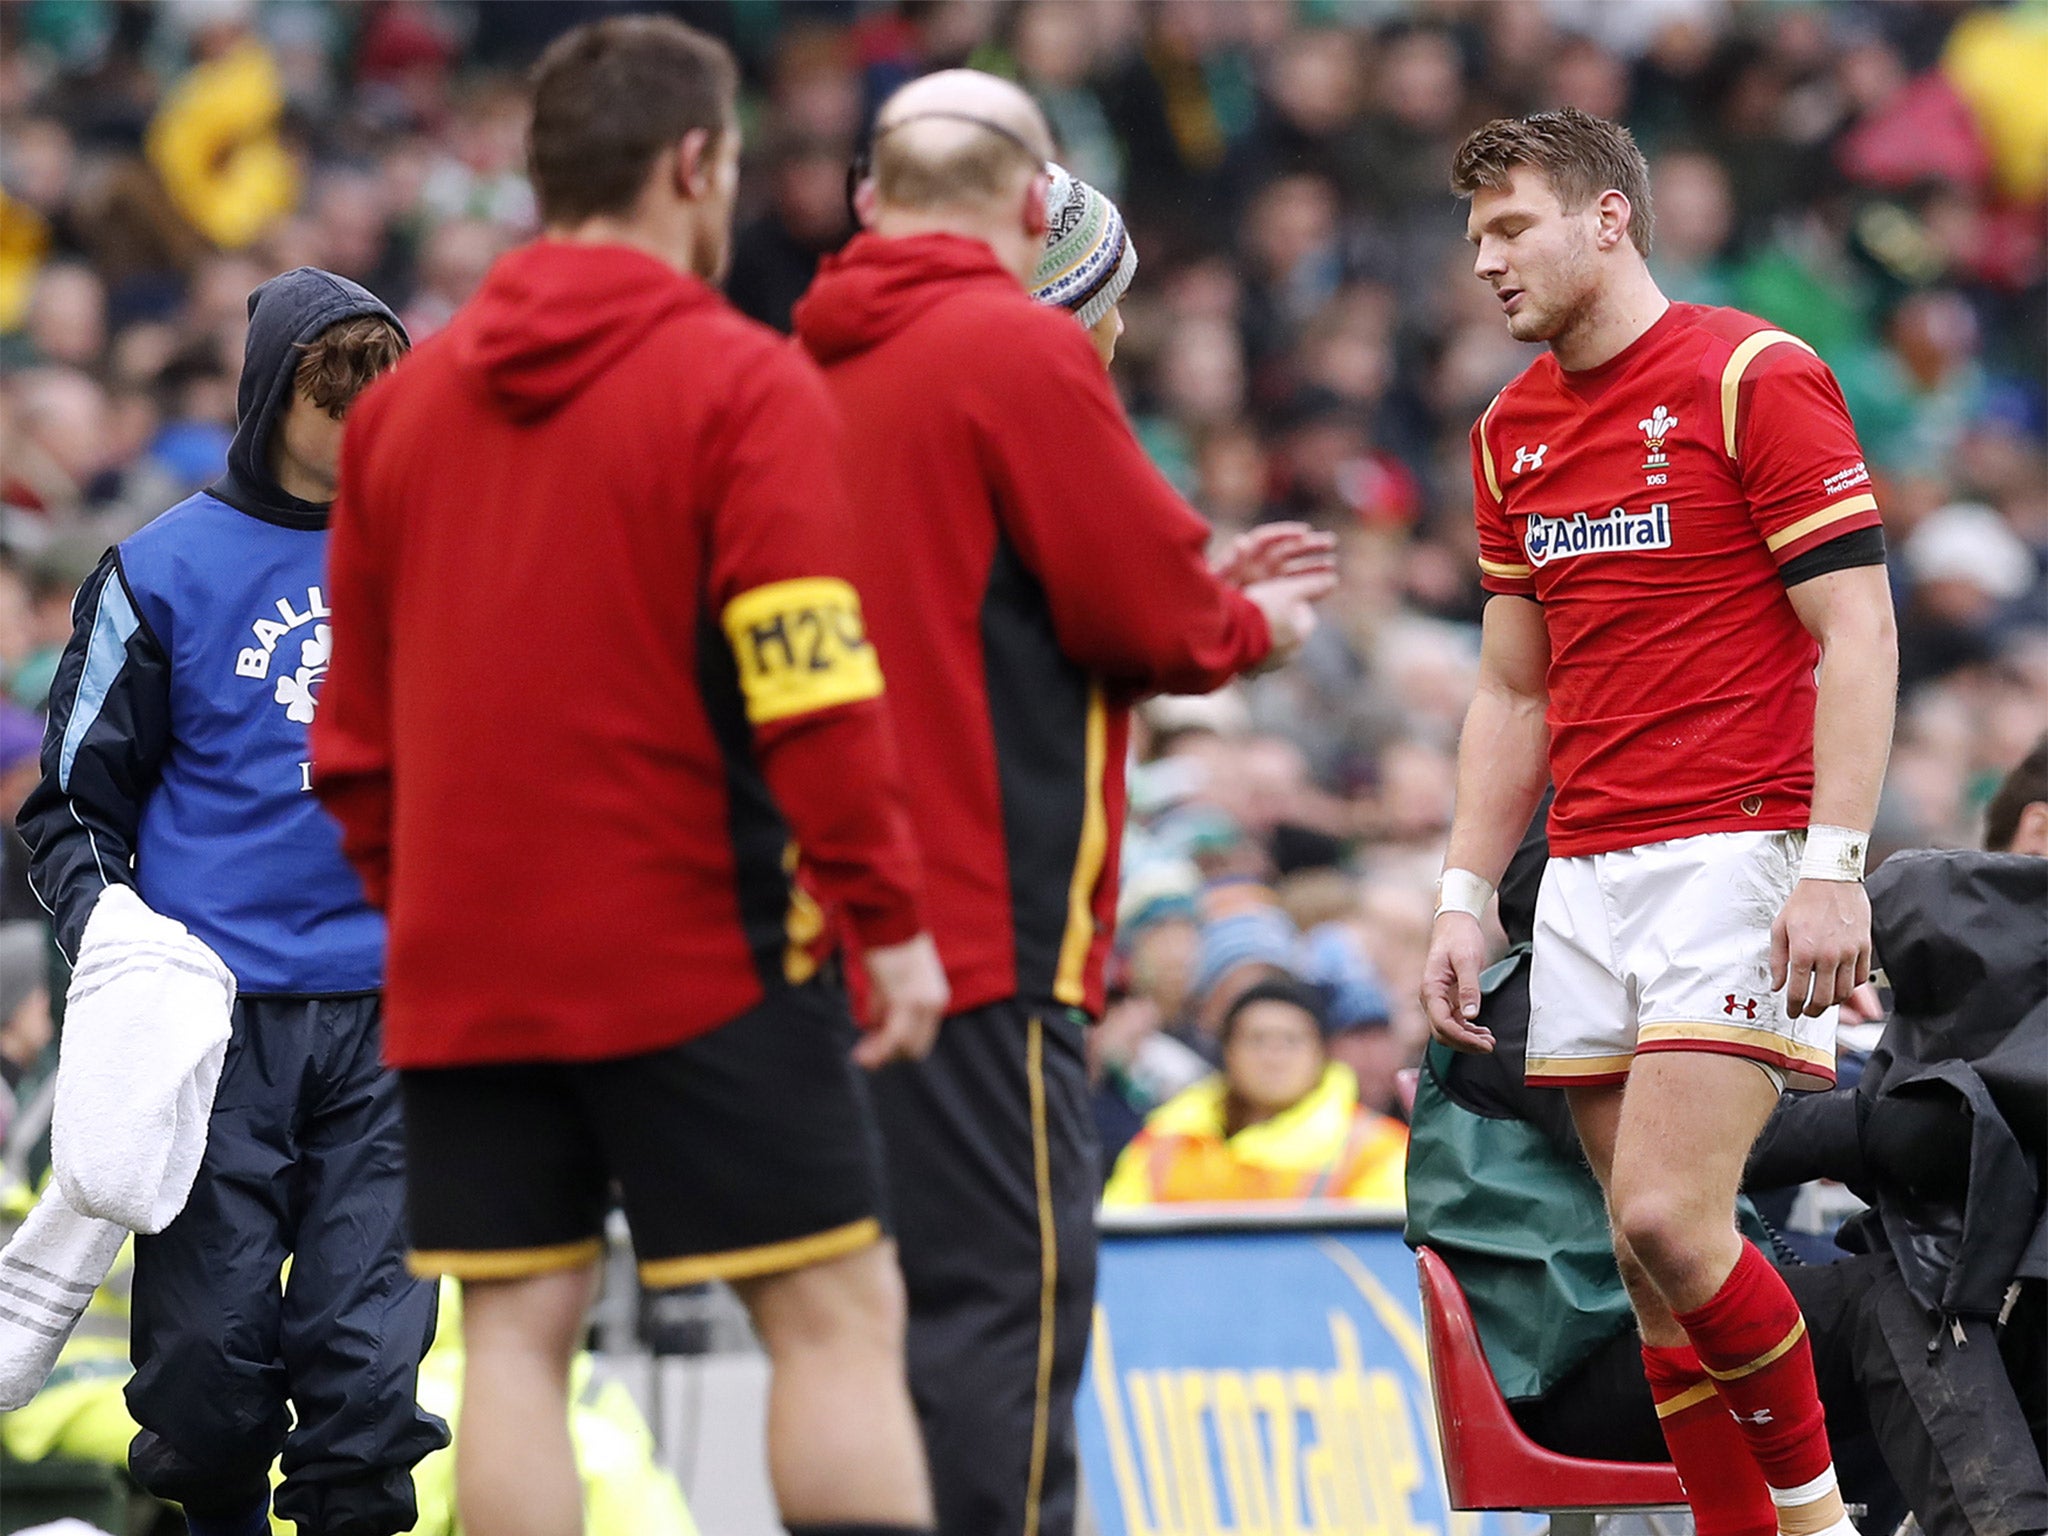 Wales fly-half Dan Biggar is helped from the field after spraining his ankle against Ireland during the 16-16 draw in Dublin